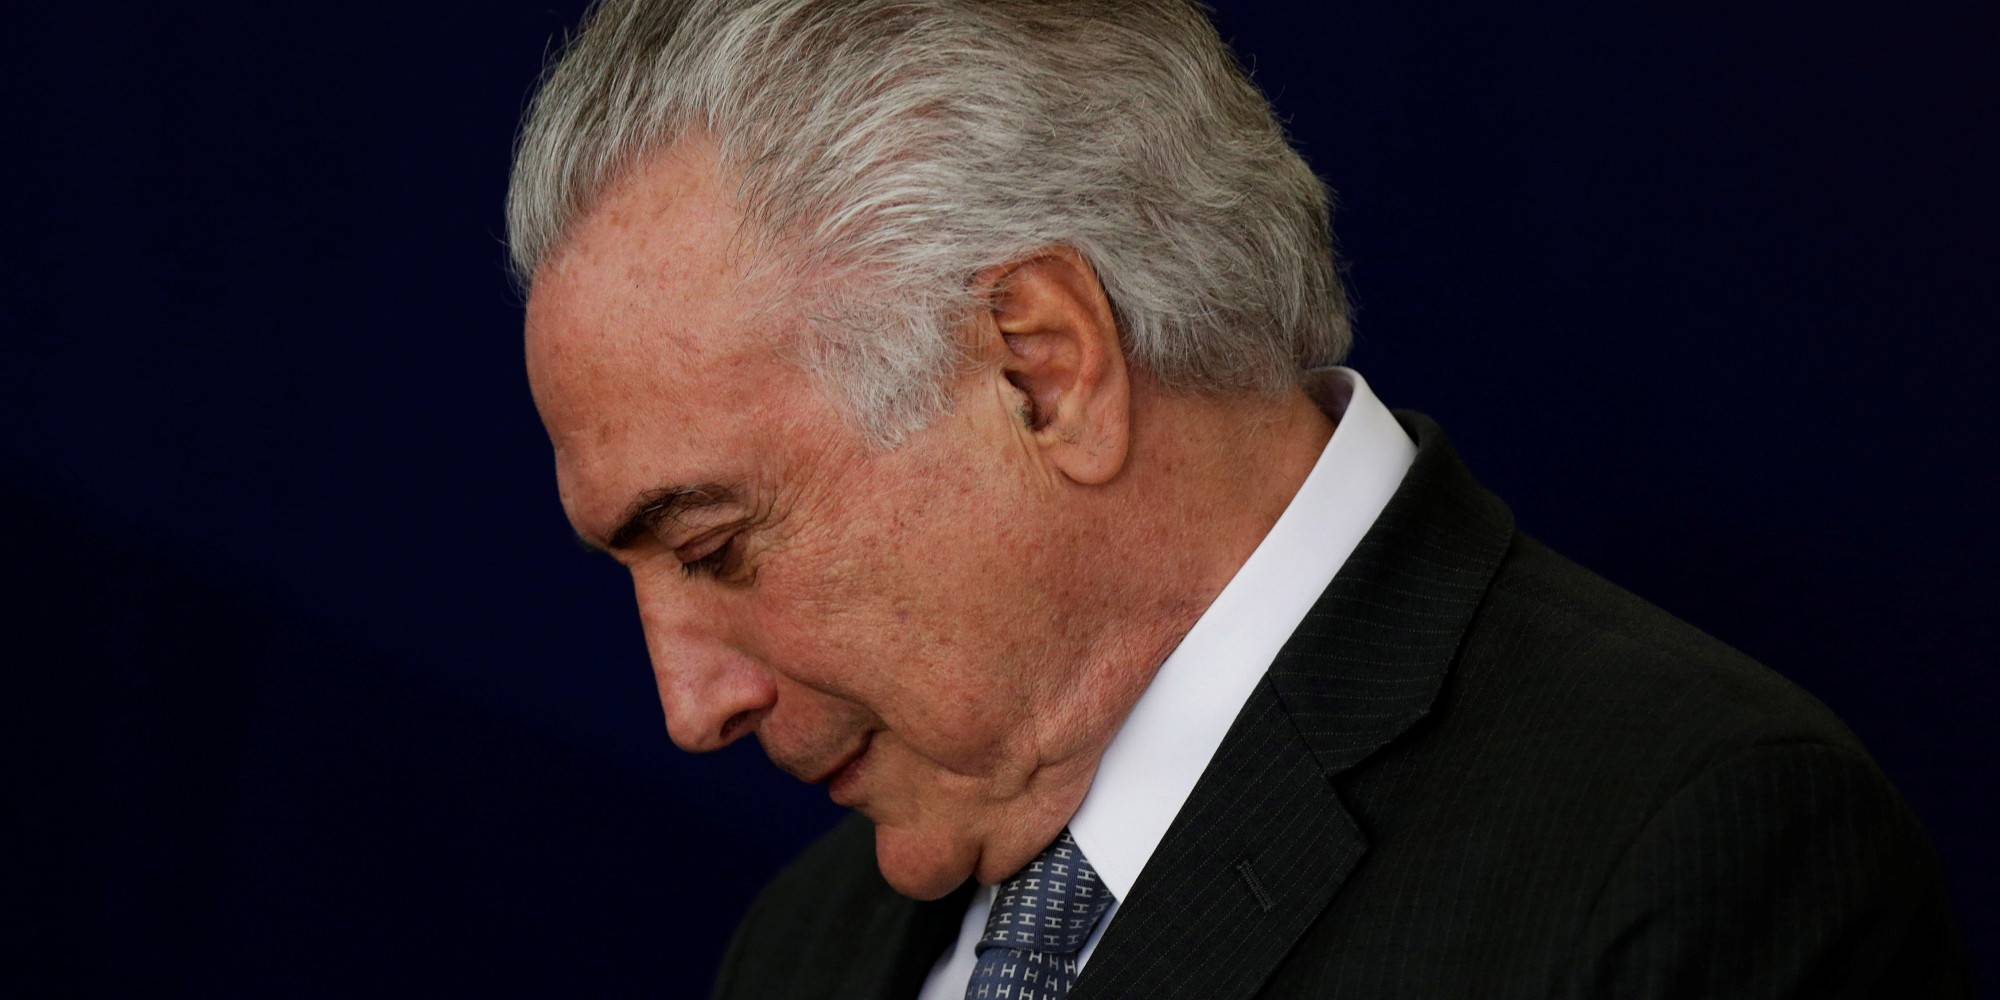 Brazil's President Michel Temer reacts during launch ceremony of the "New School" (Novo Ensino Medio) at the Presidential Palace in Brasilia, Brazil